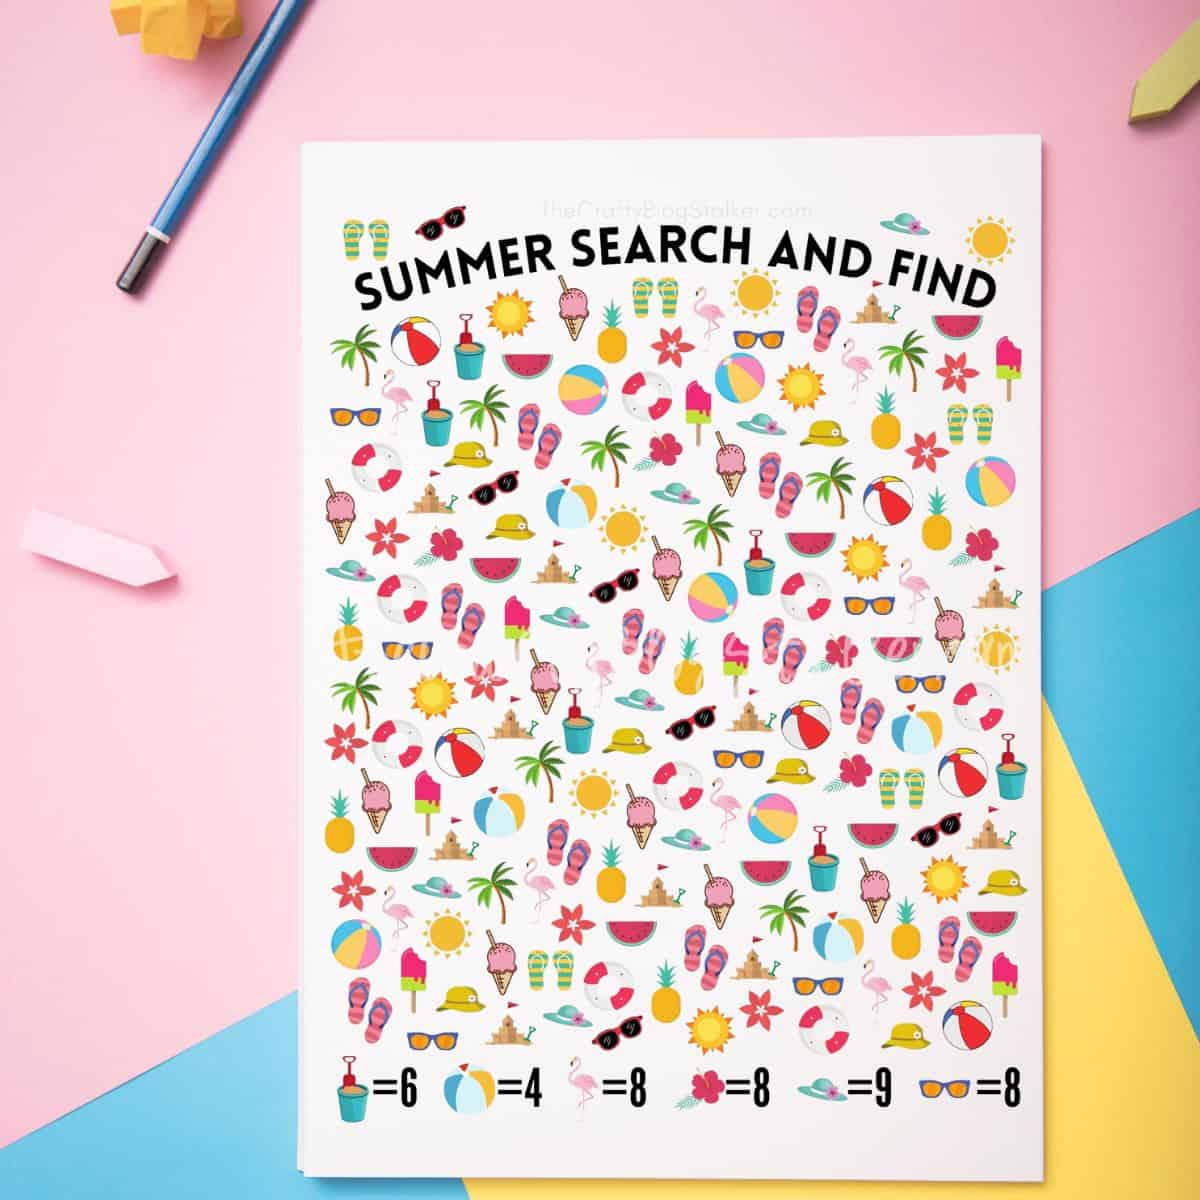 Summer search and find printable on a pink background.